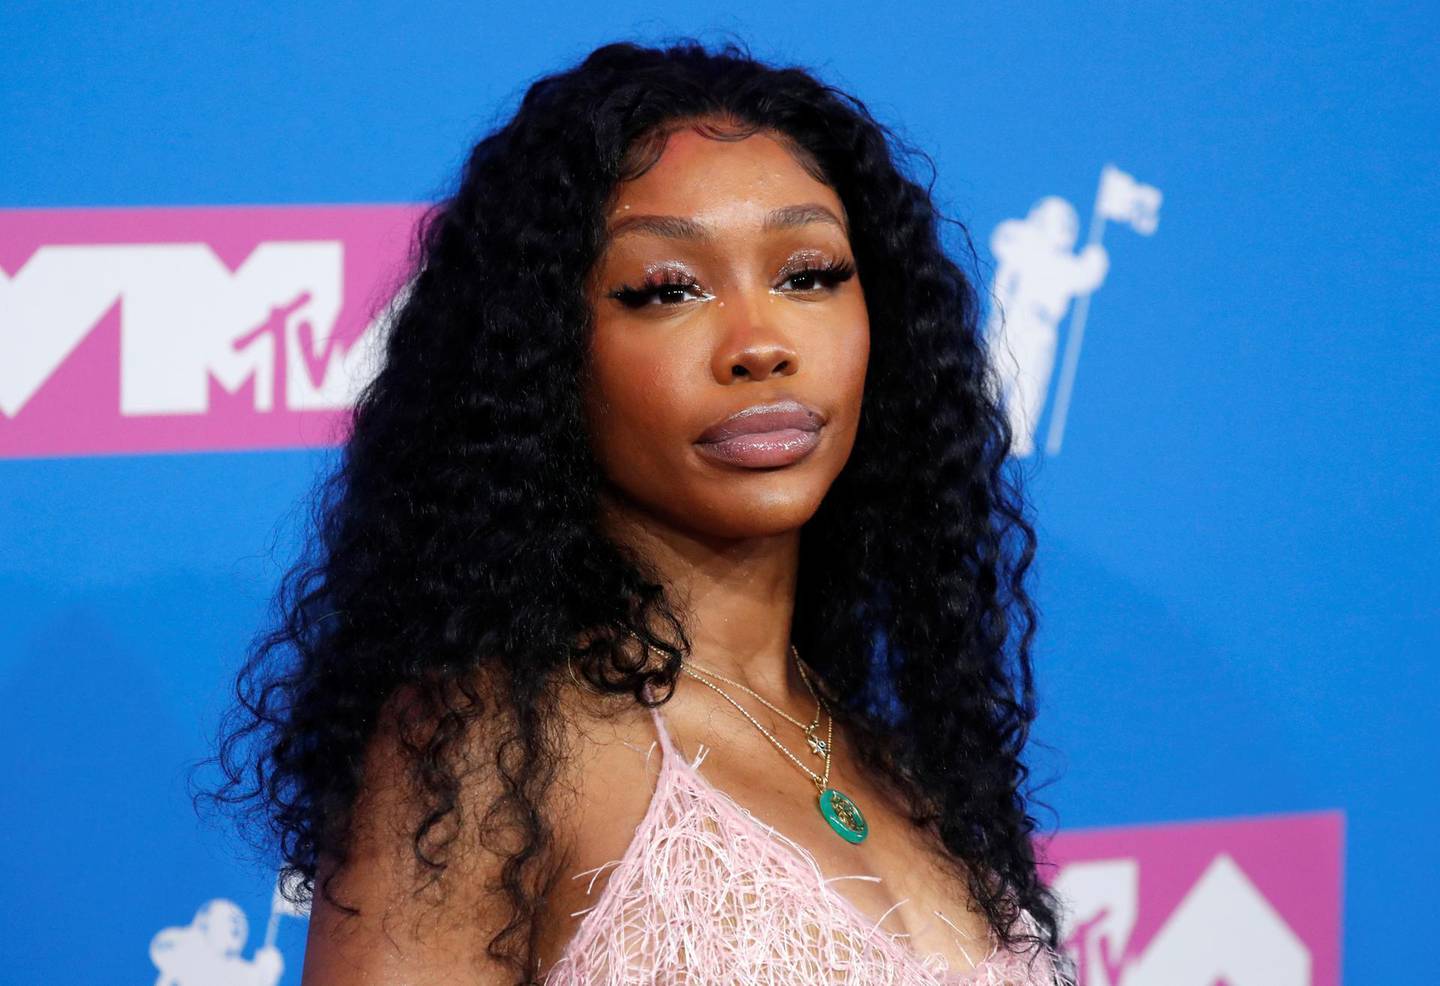 FILE PHOTO: 2018 MTV Video Music Awards - Arrivals - Radio City Music Hall, New York, U.S., August 20, 2018. - SZA. REUTERS/Andrew Kelly/File Photo